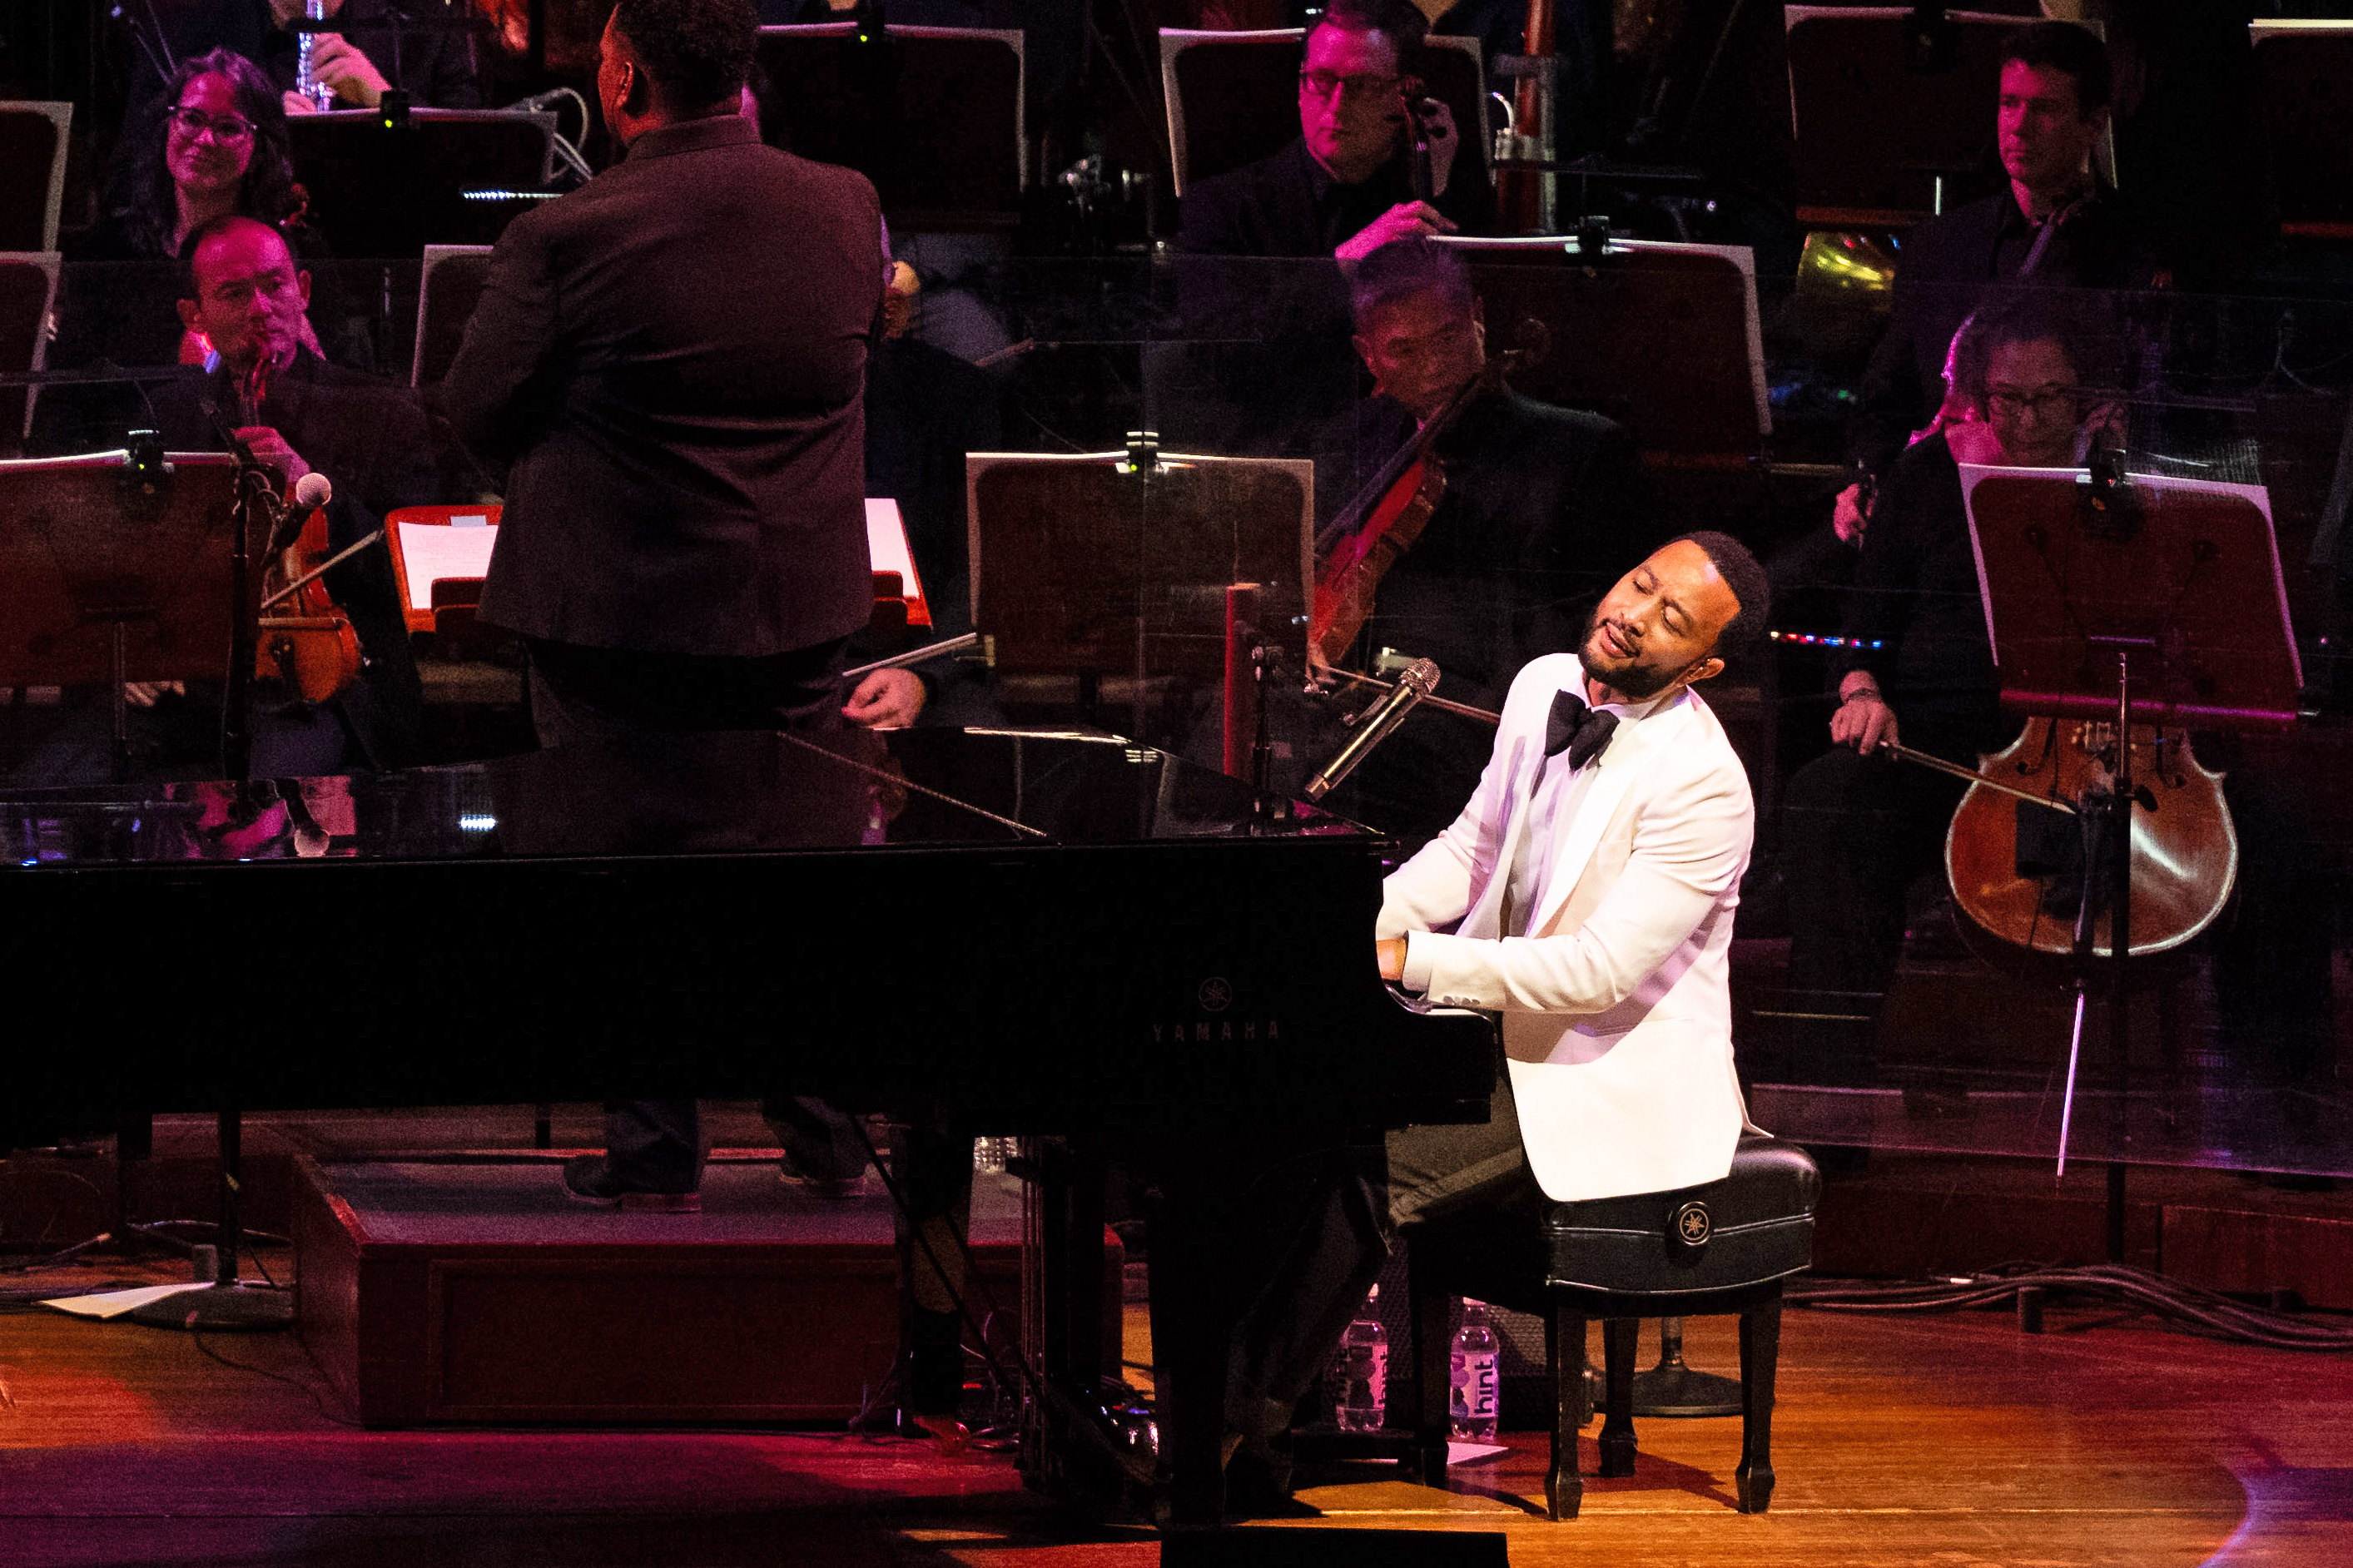 A man in a white tuxedo jacket plays a grand piano on stage, eyes closed. Behind him, an orchestra of musicians in black attire performs under the direction of a conductor.